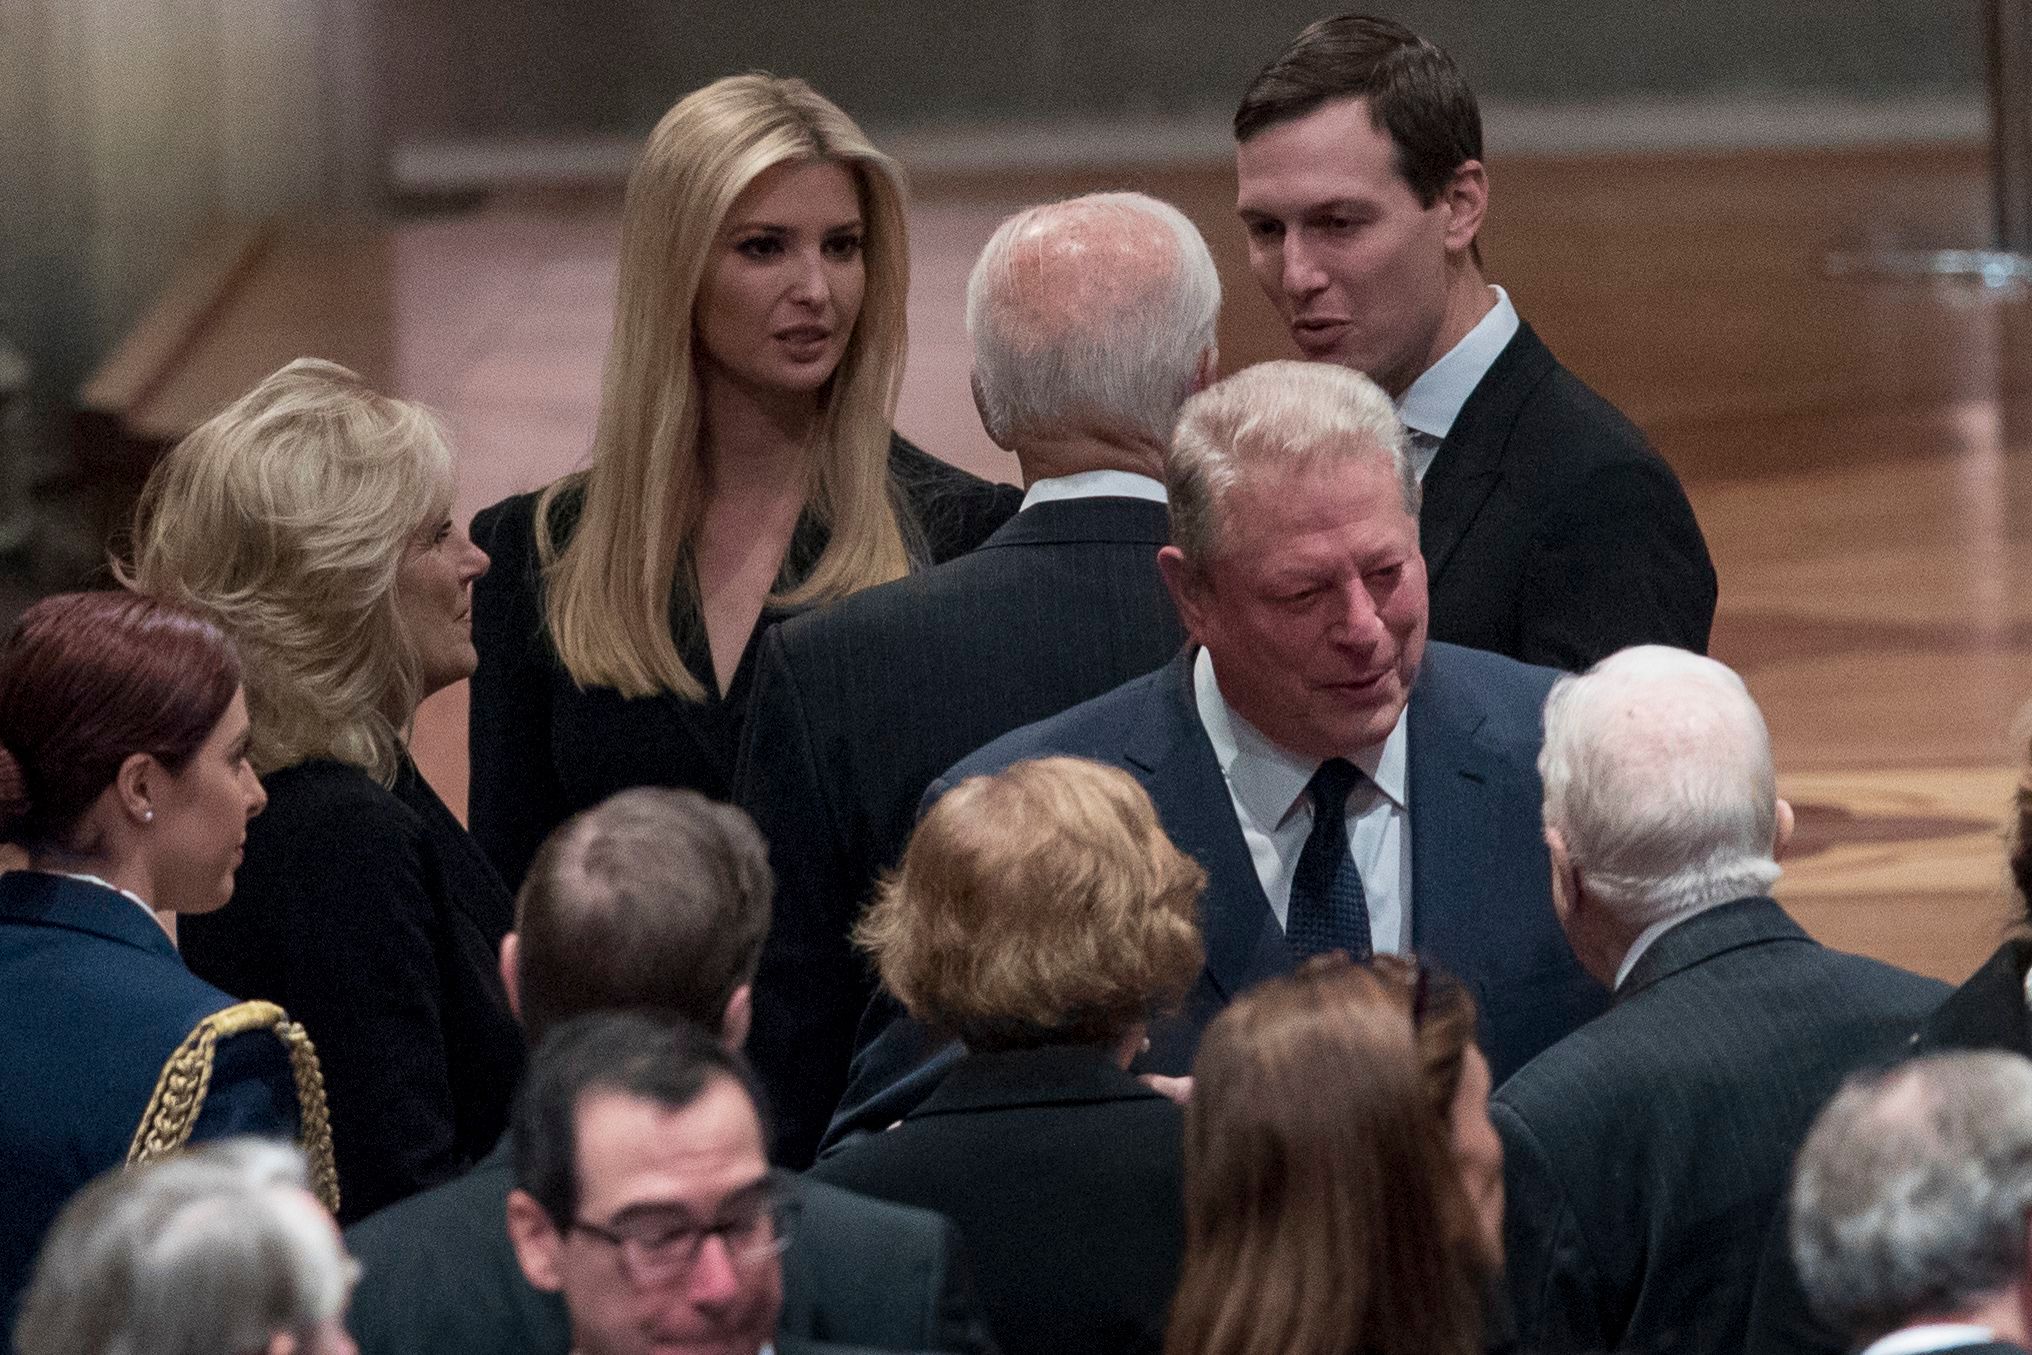 Former Vice President Joe Biden, and his wife Jill Biden, speak with Ivanka Trump, the daughter of President Donald Trump, and her husband, President Donald Trump's White House Senior Adviser Jared Kushner, as former Vice President Al Gore, speak to former President Jimmy Carter, and former first lady Rosalynn Carter, before a State Funeral for former President George H.W. Bush at the National Cathedral, in Washington, DC on Dec. 5, 2018. (Andrew Harnik/Pool/EPA —FE/REX/Shutterstock)